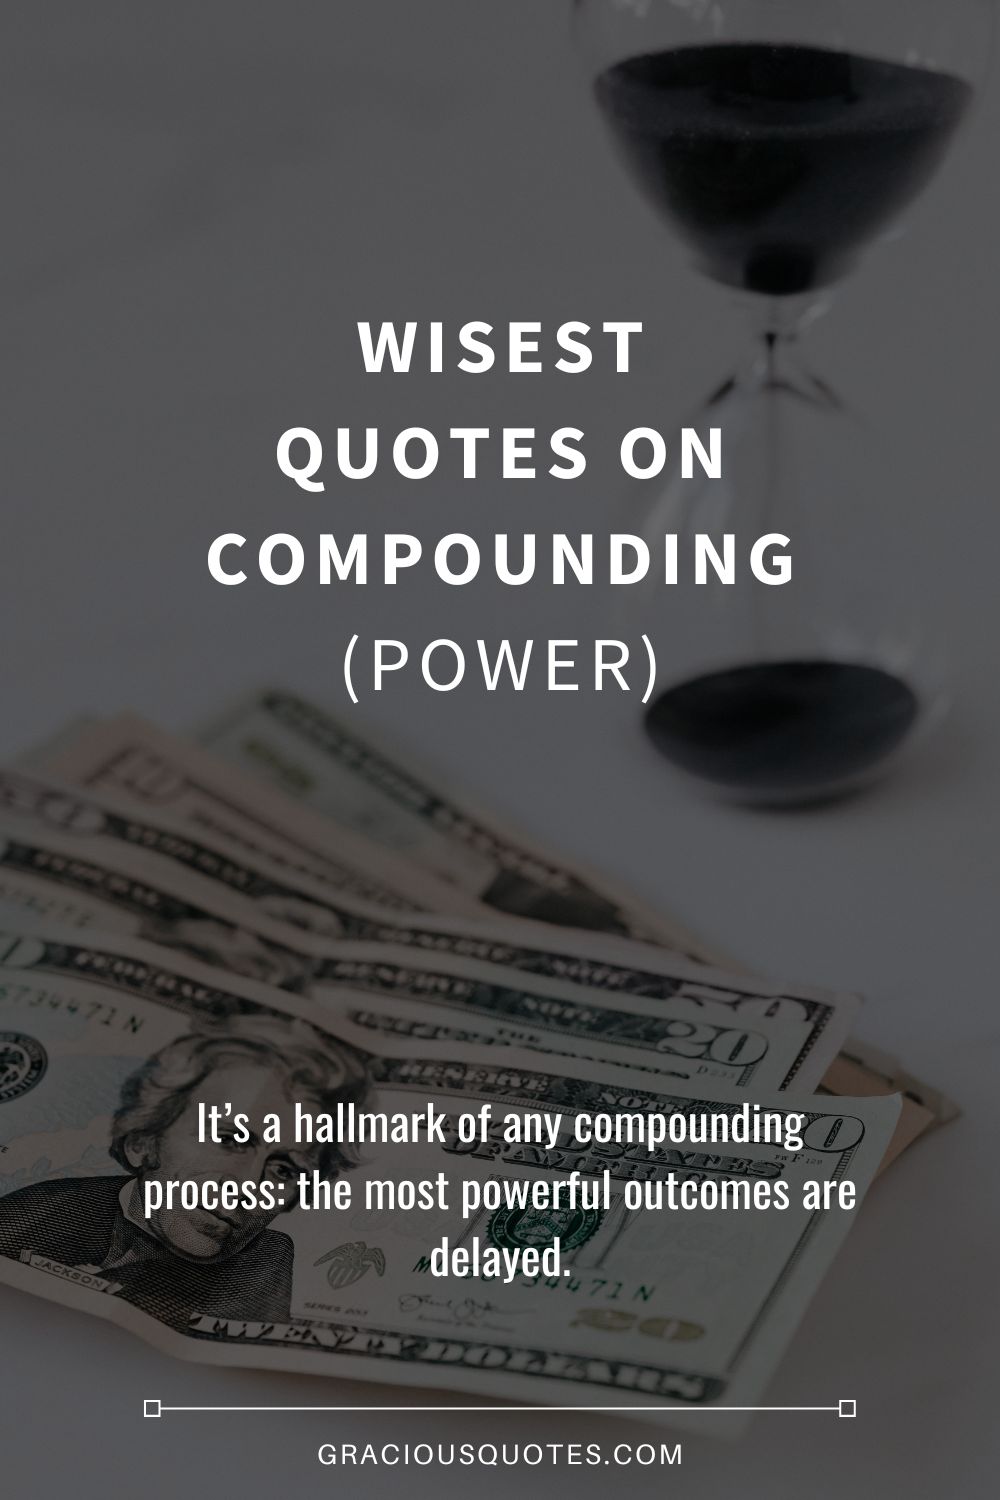 Wisest Quotes on Compounding (POWER) - Gracious Quotes